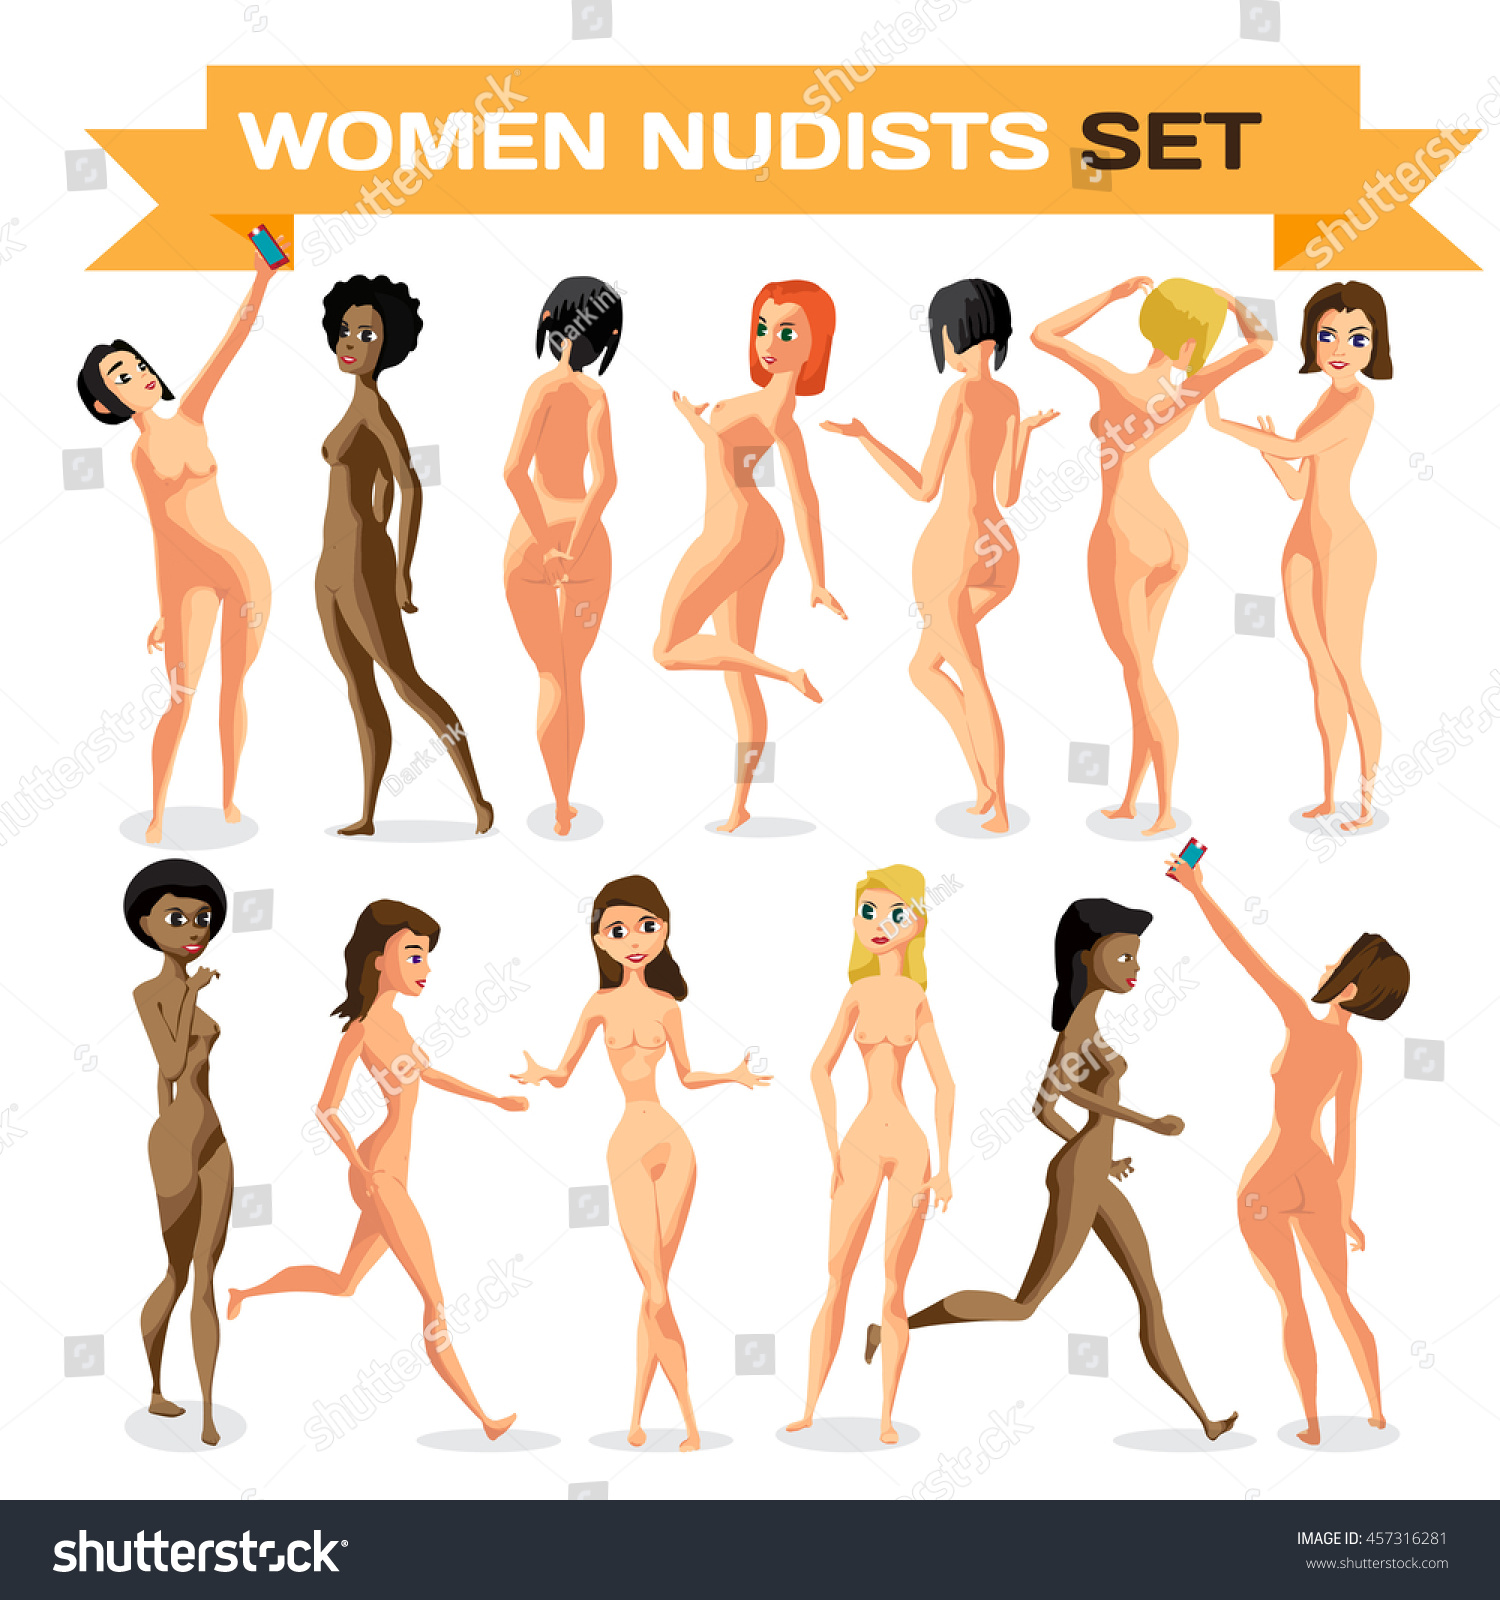 danny jares recommends pictures of nudist women pic